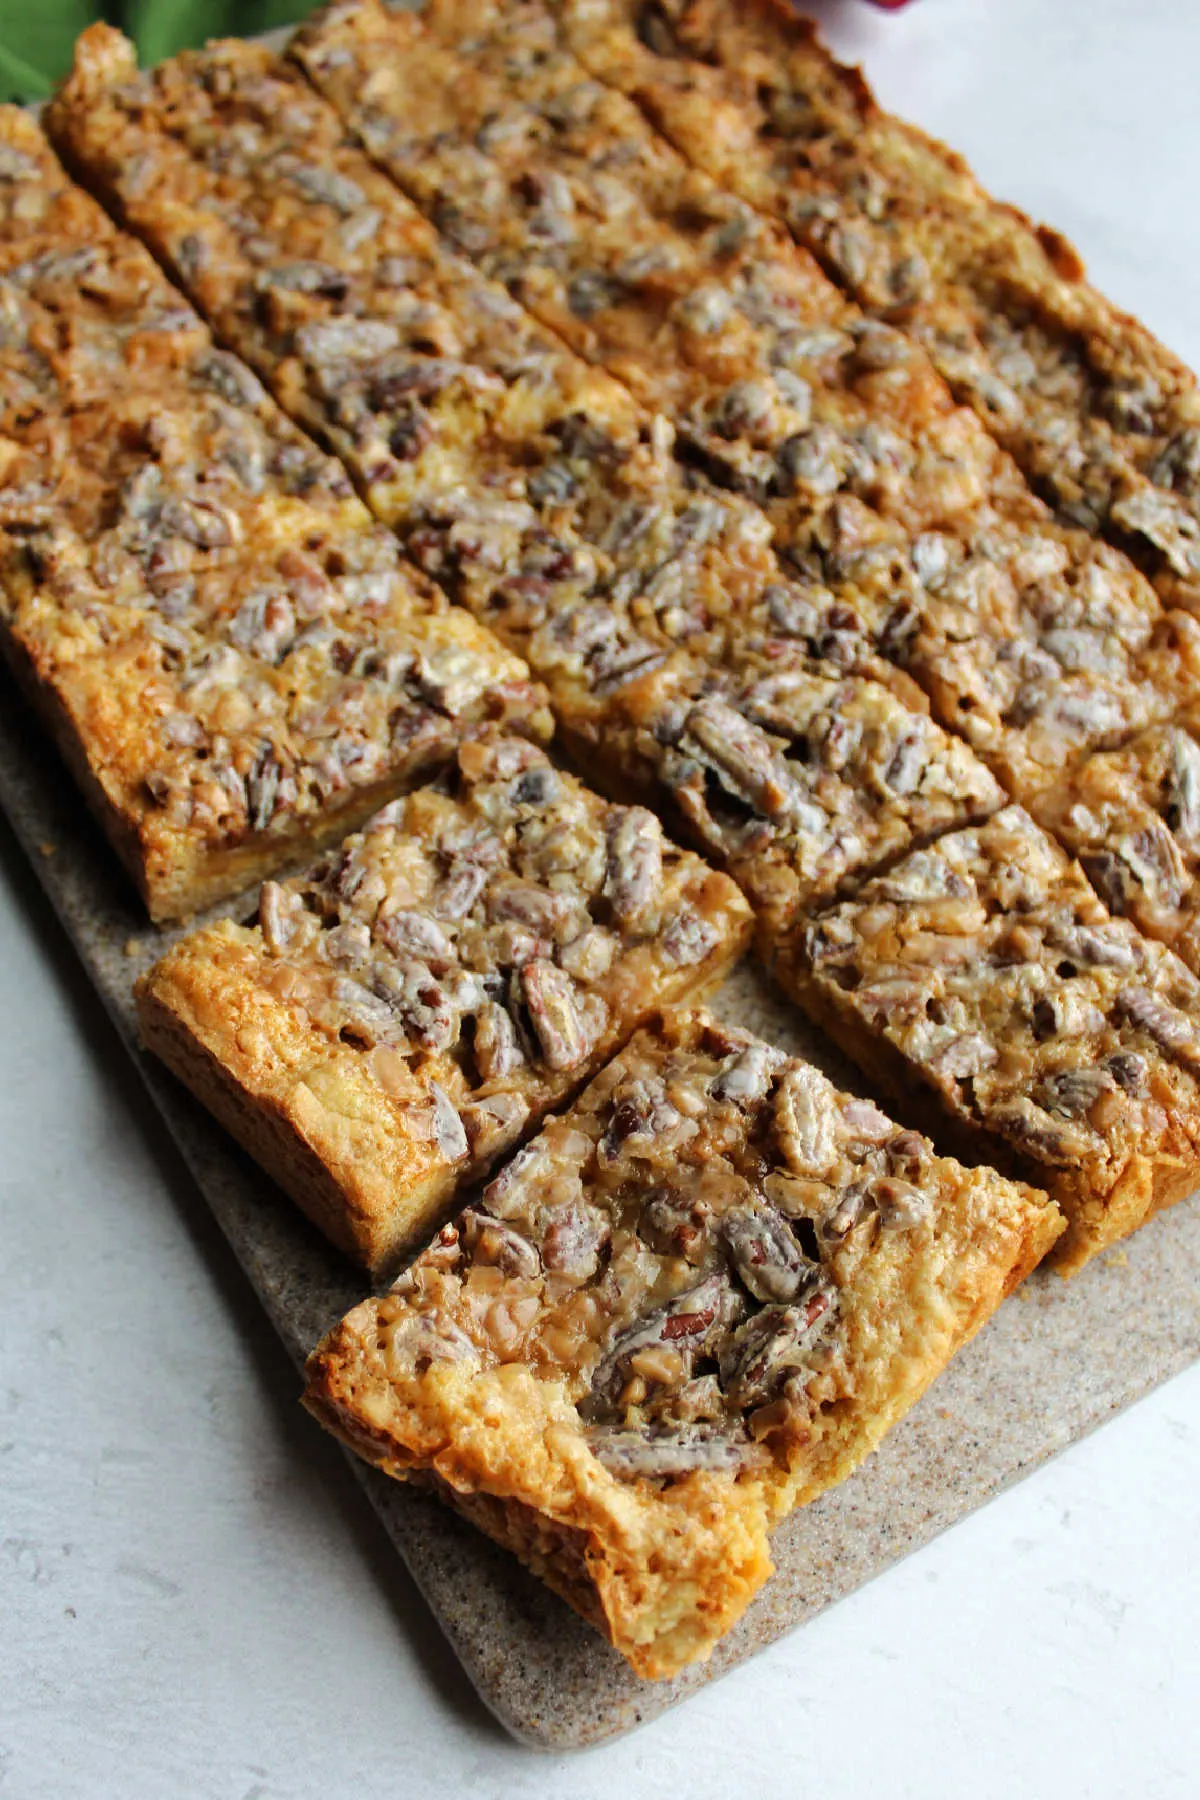 Pecan dream bars cut into squares and ready to serve.